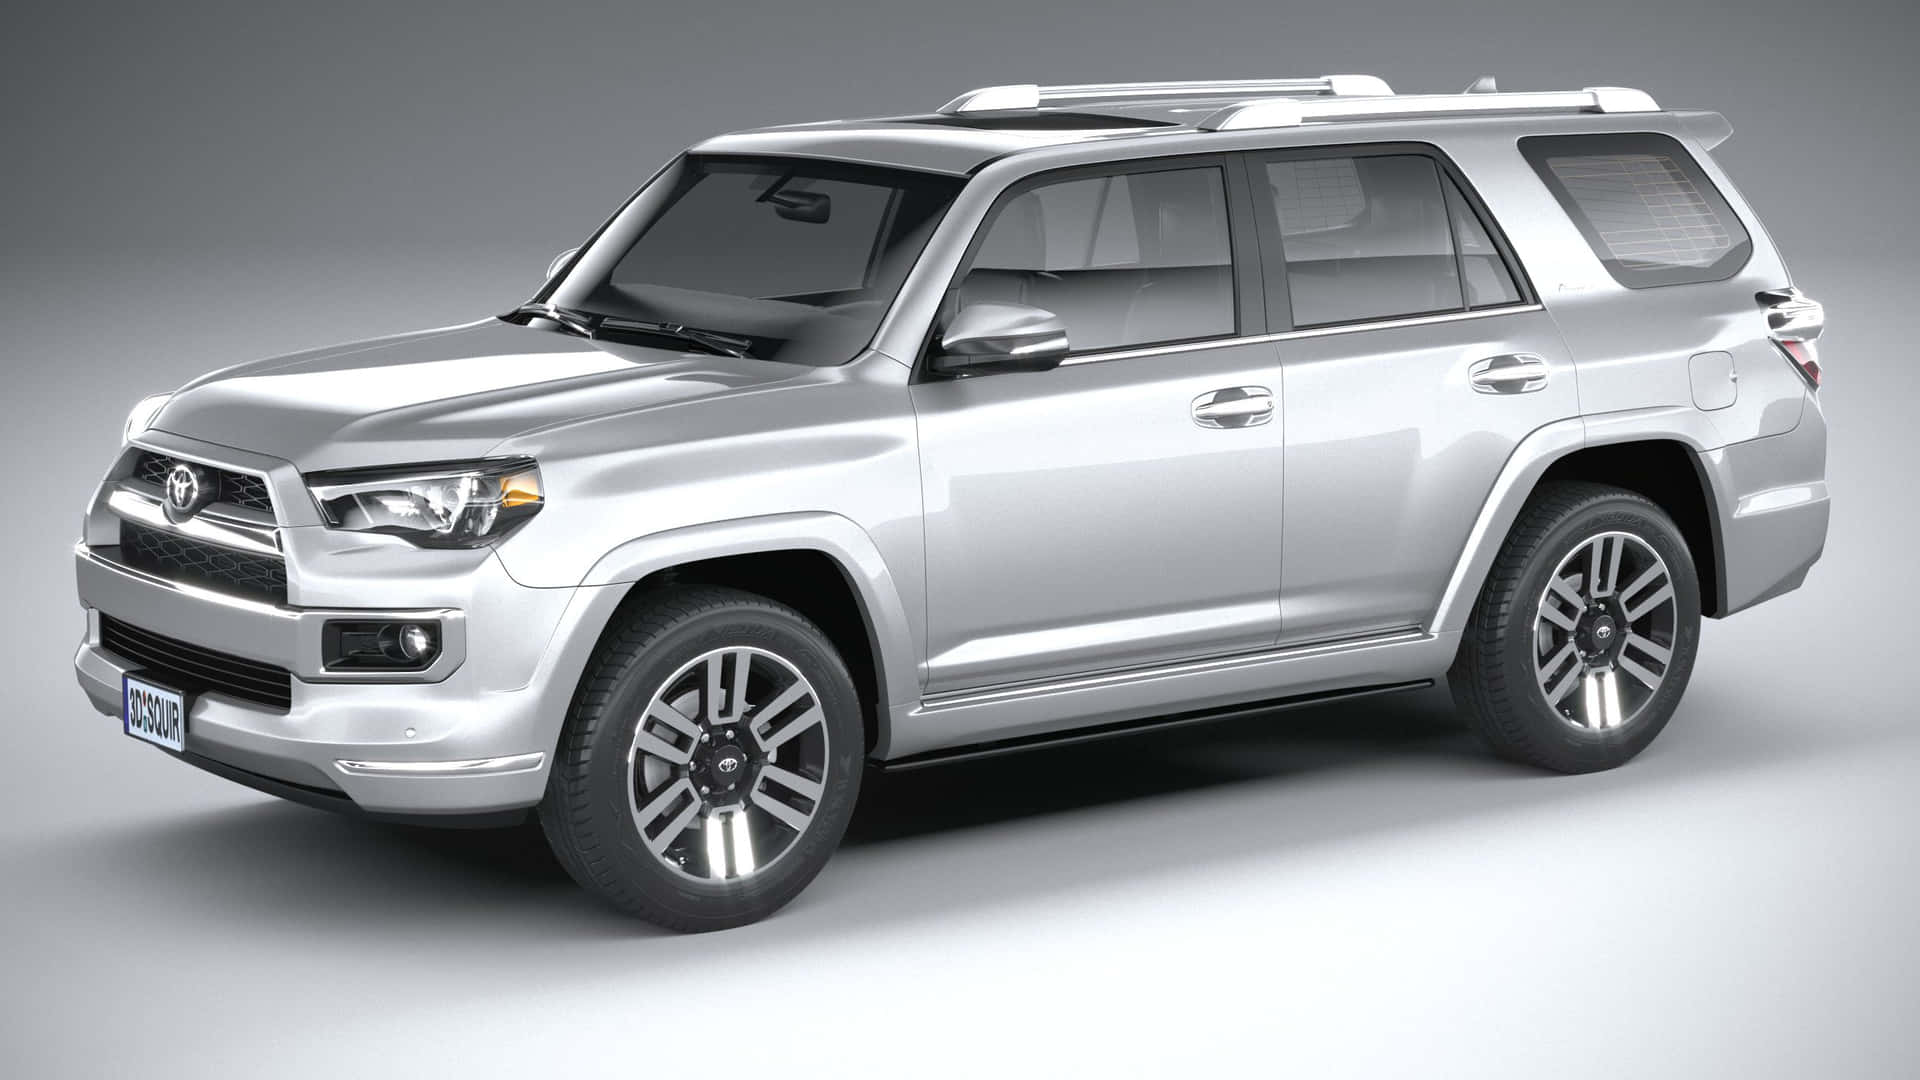 The Silver Toyota 4runner Is Shown On A Gray Background